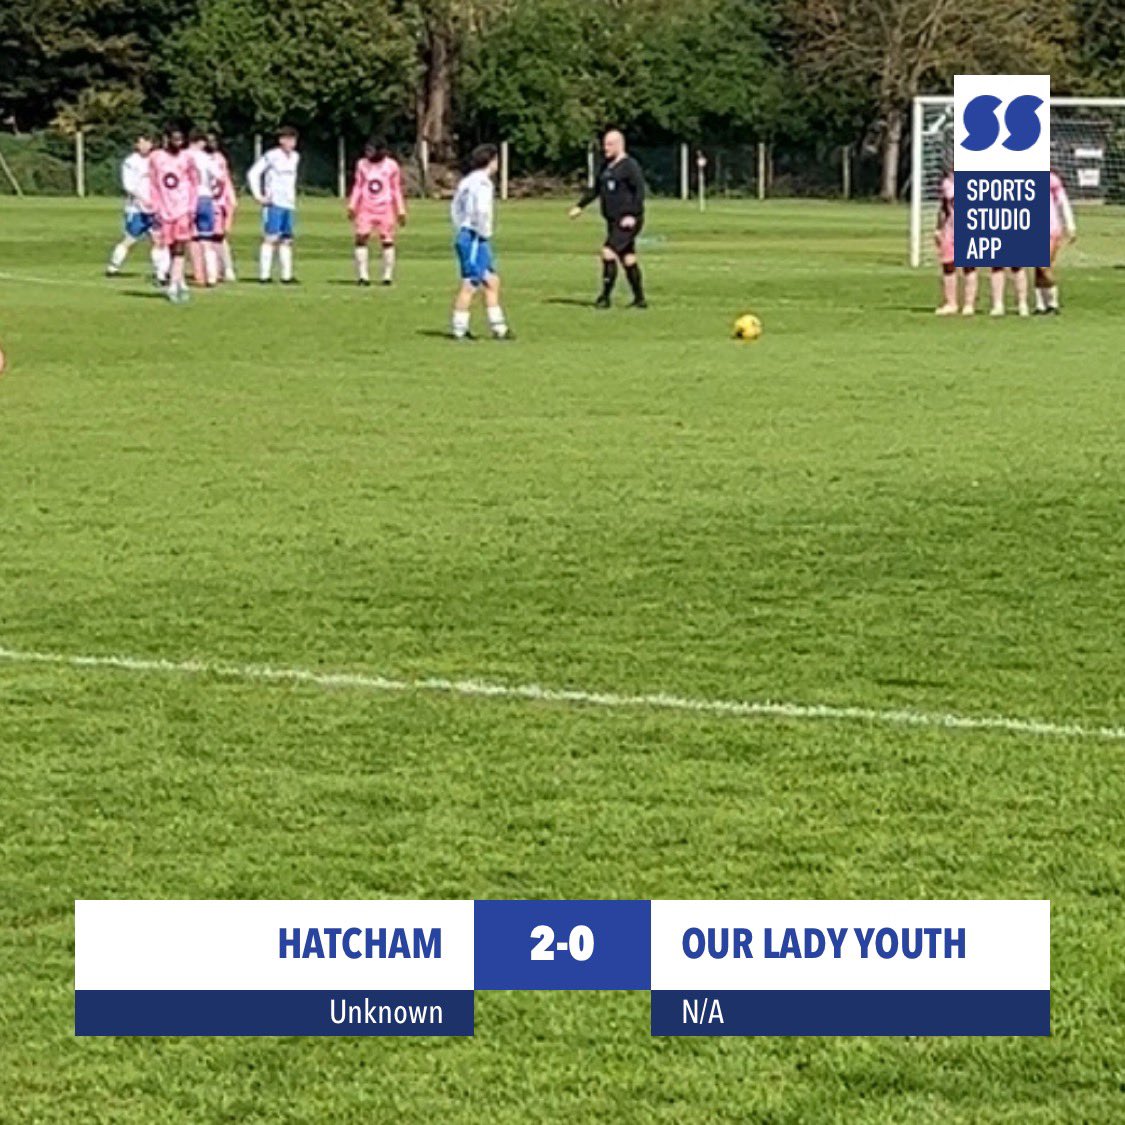 Not the result we wanted today losing 2-0 to @HatchamFC in the semi final of the plumstead cup. Think it’s fair to say we did ourselves proud even getting this far in the competition. Was a good experience playing against a top side. Boys can keep our heads held high. #YOOF ⚪️🔵